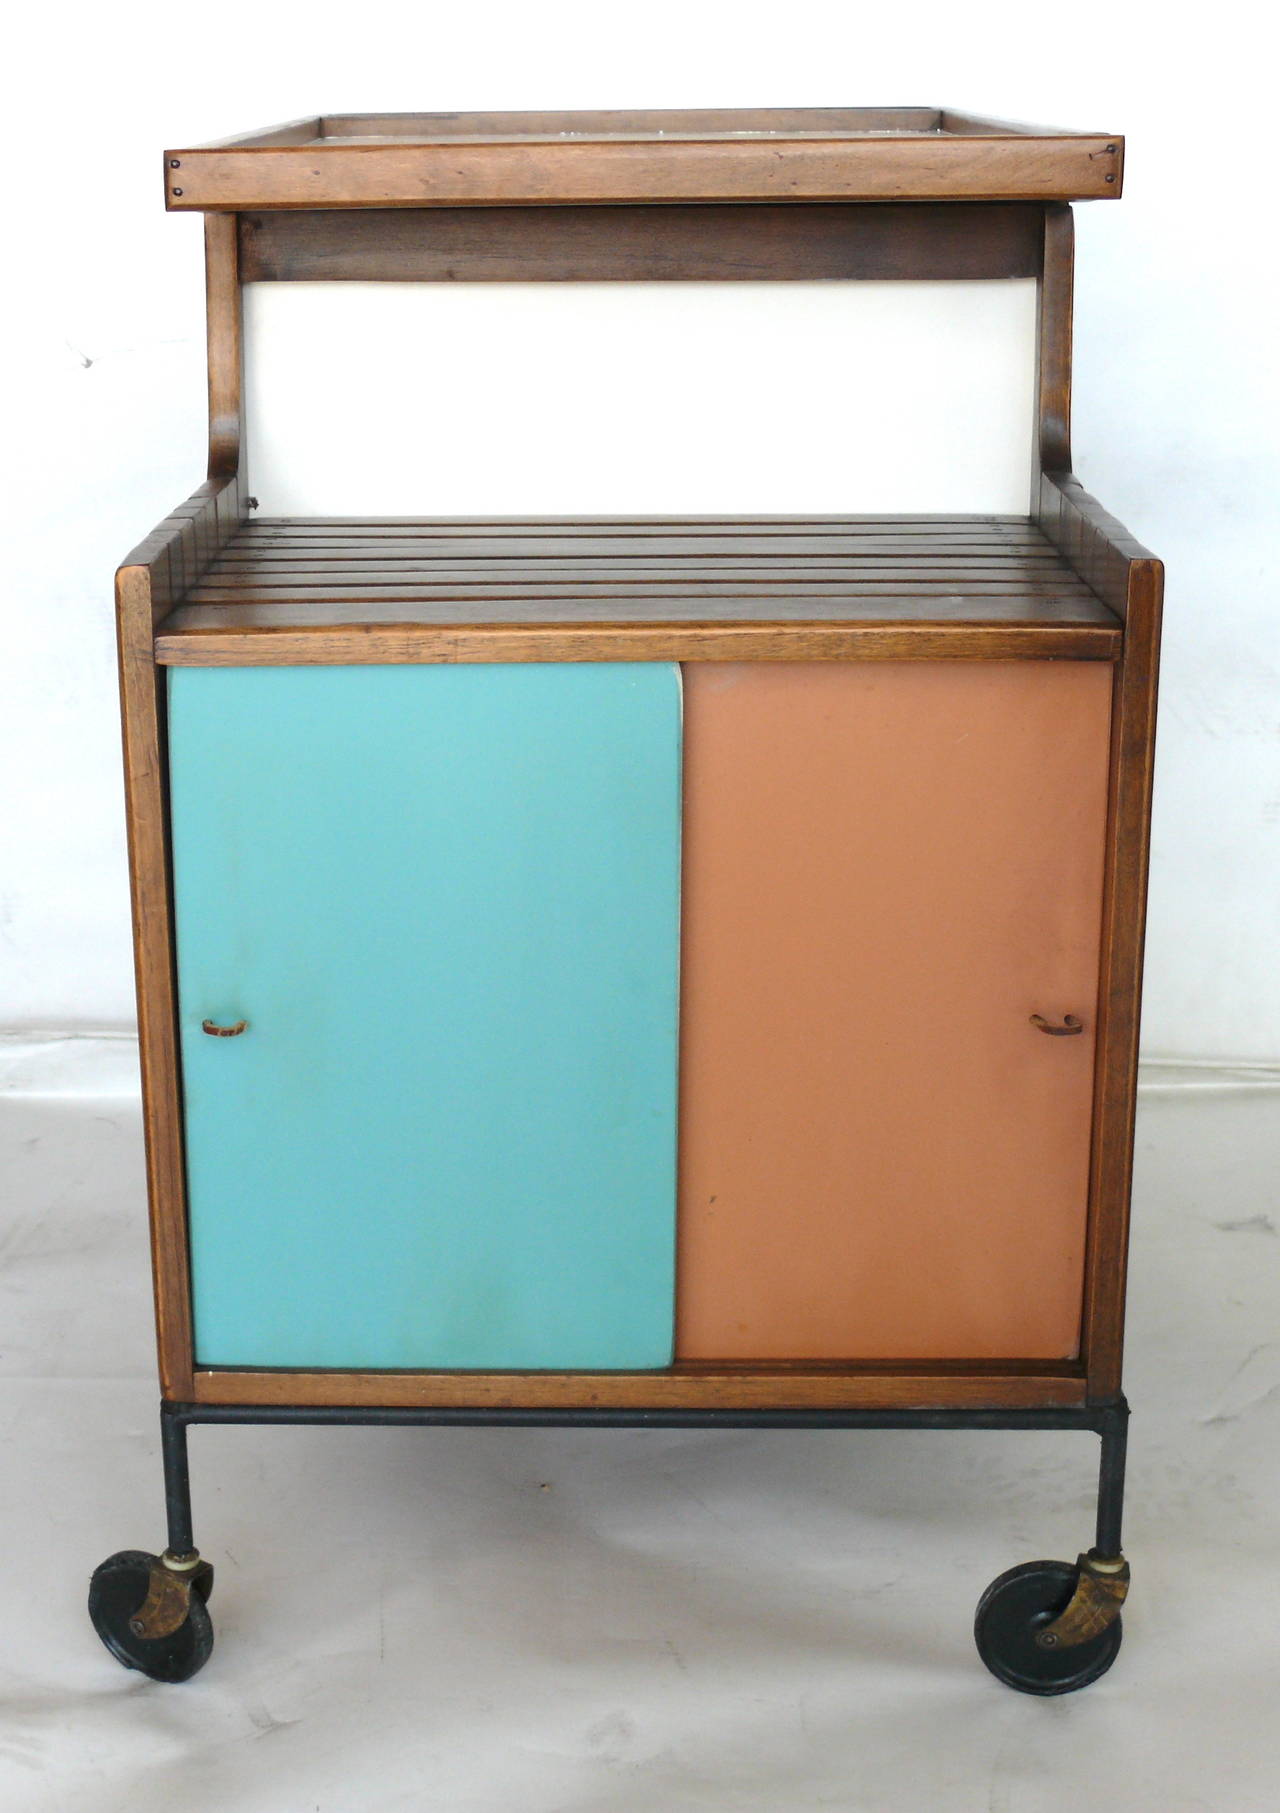 Whimsical bar cart by Arthur Umanoff on brass casters. Iron framed cart features slatted wood, a tray top, multiple shelves and an enclosed cabinet. Sliding doors have two different colors that you can reverse and interchange. Great colors and in